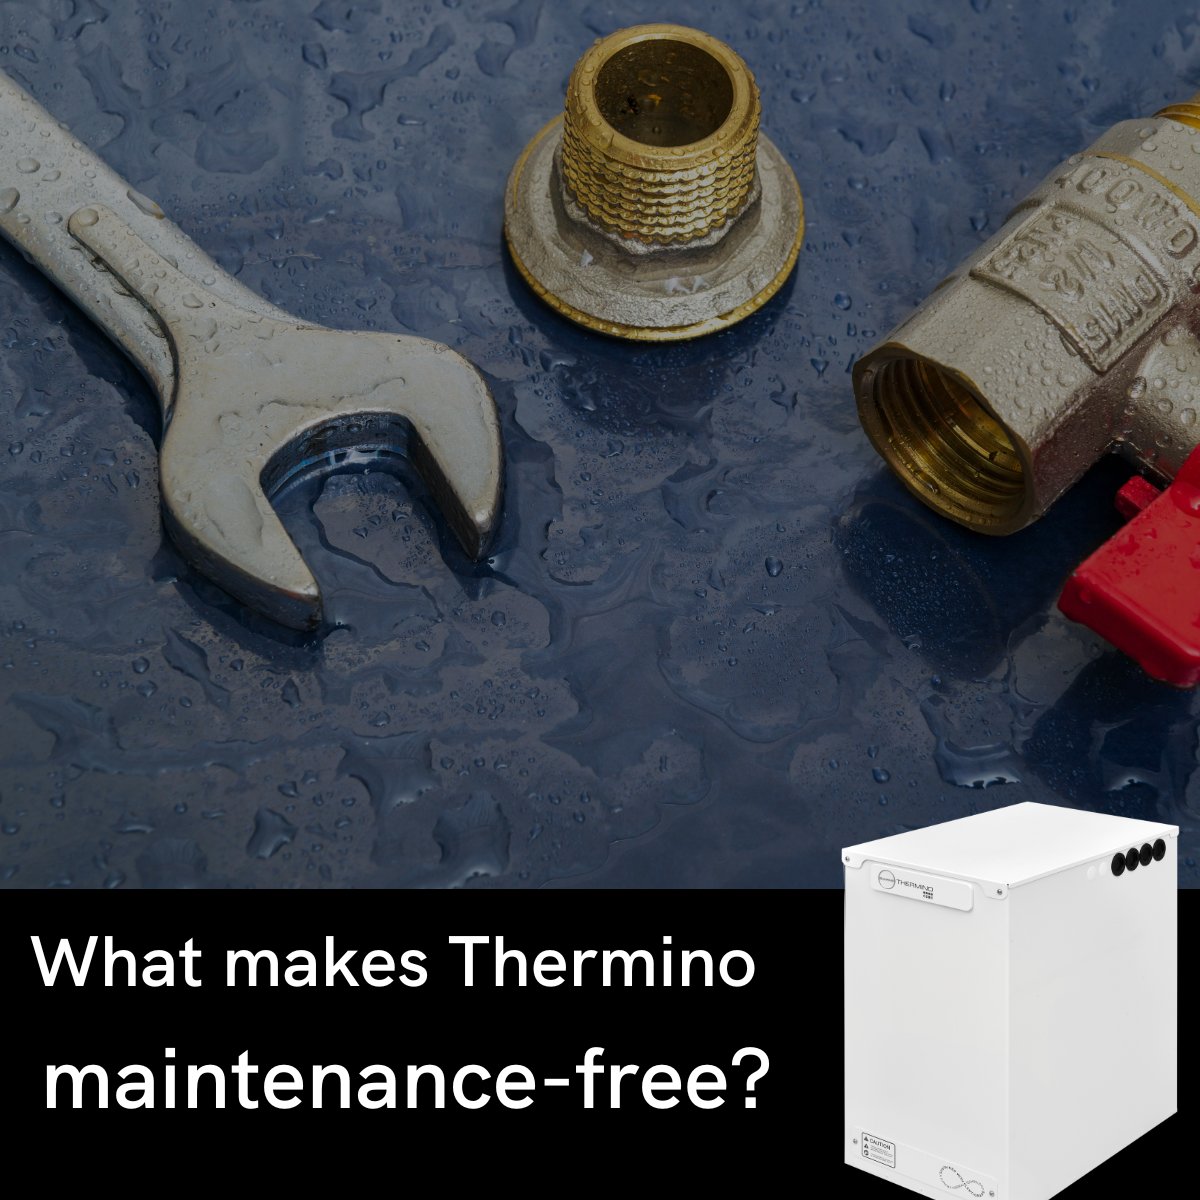 All our Thermino products fulfill the safety measures set out by Building Regulations document and the Scottish Building Standards’ technical handbook - since the water content stored in any of our Thermino batteries is less that 15L. Know more: sunamp.com/en-gb/hot-wate…